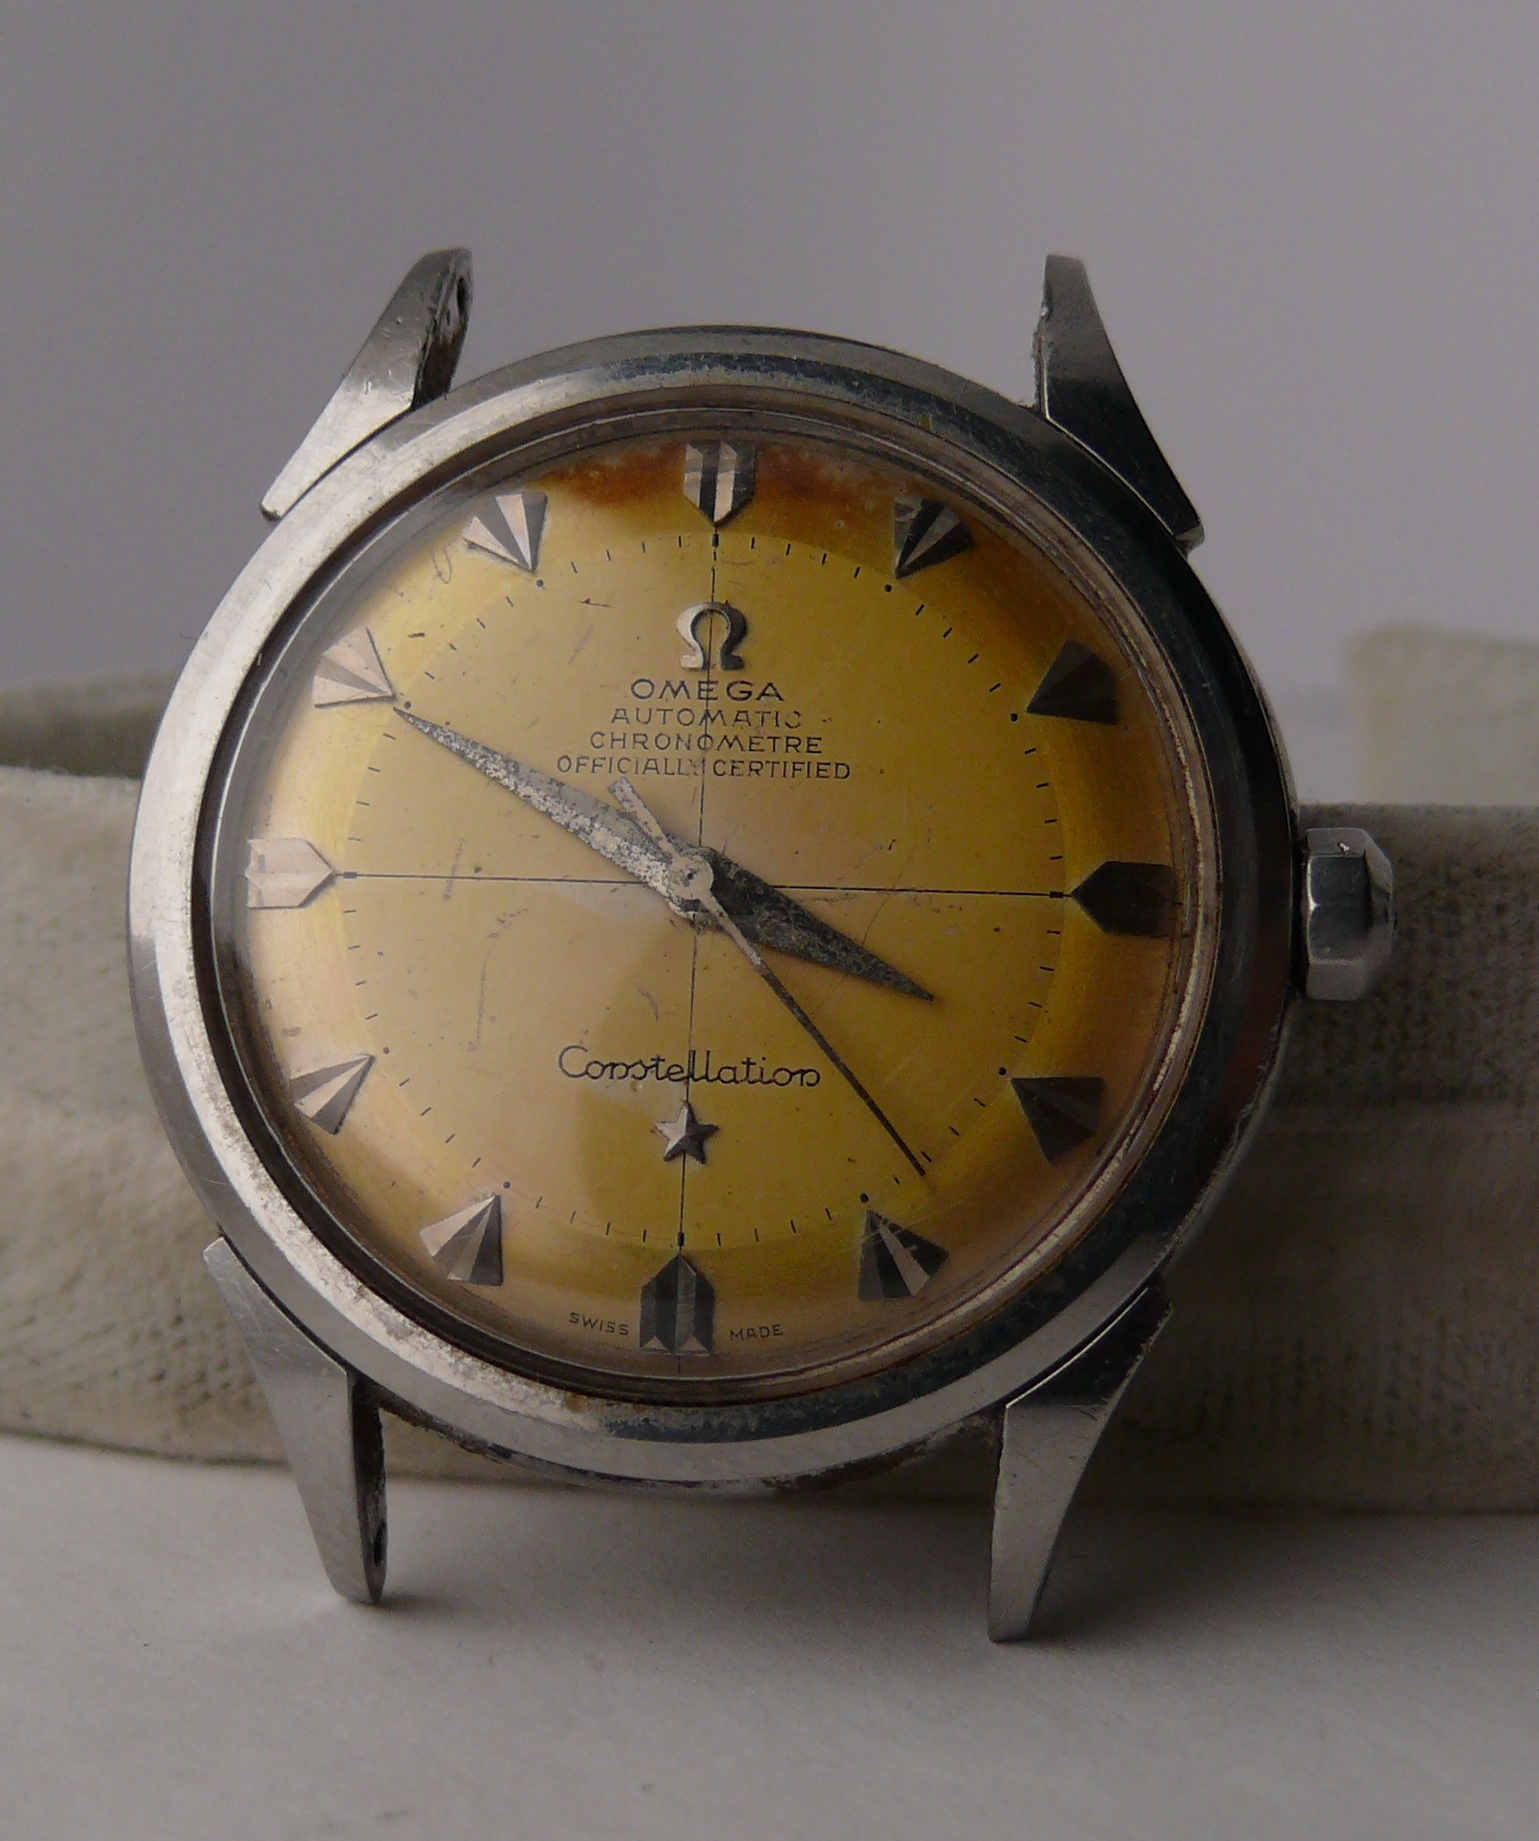 Vintage Omega Constellation Cronometre Certified Wristwatch Ref 2782. Original dial showing even “ - Image 8 of 12